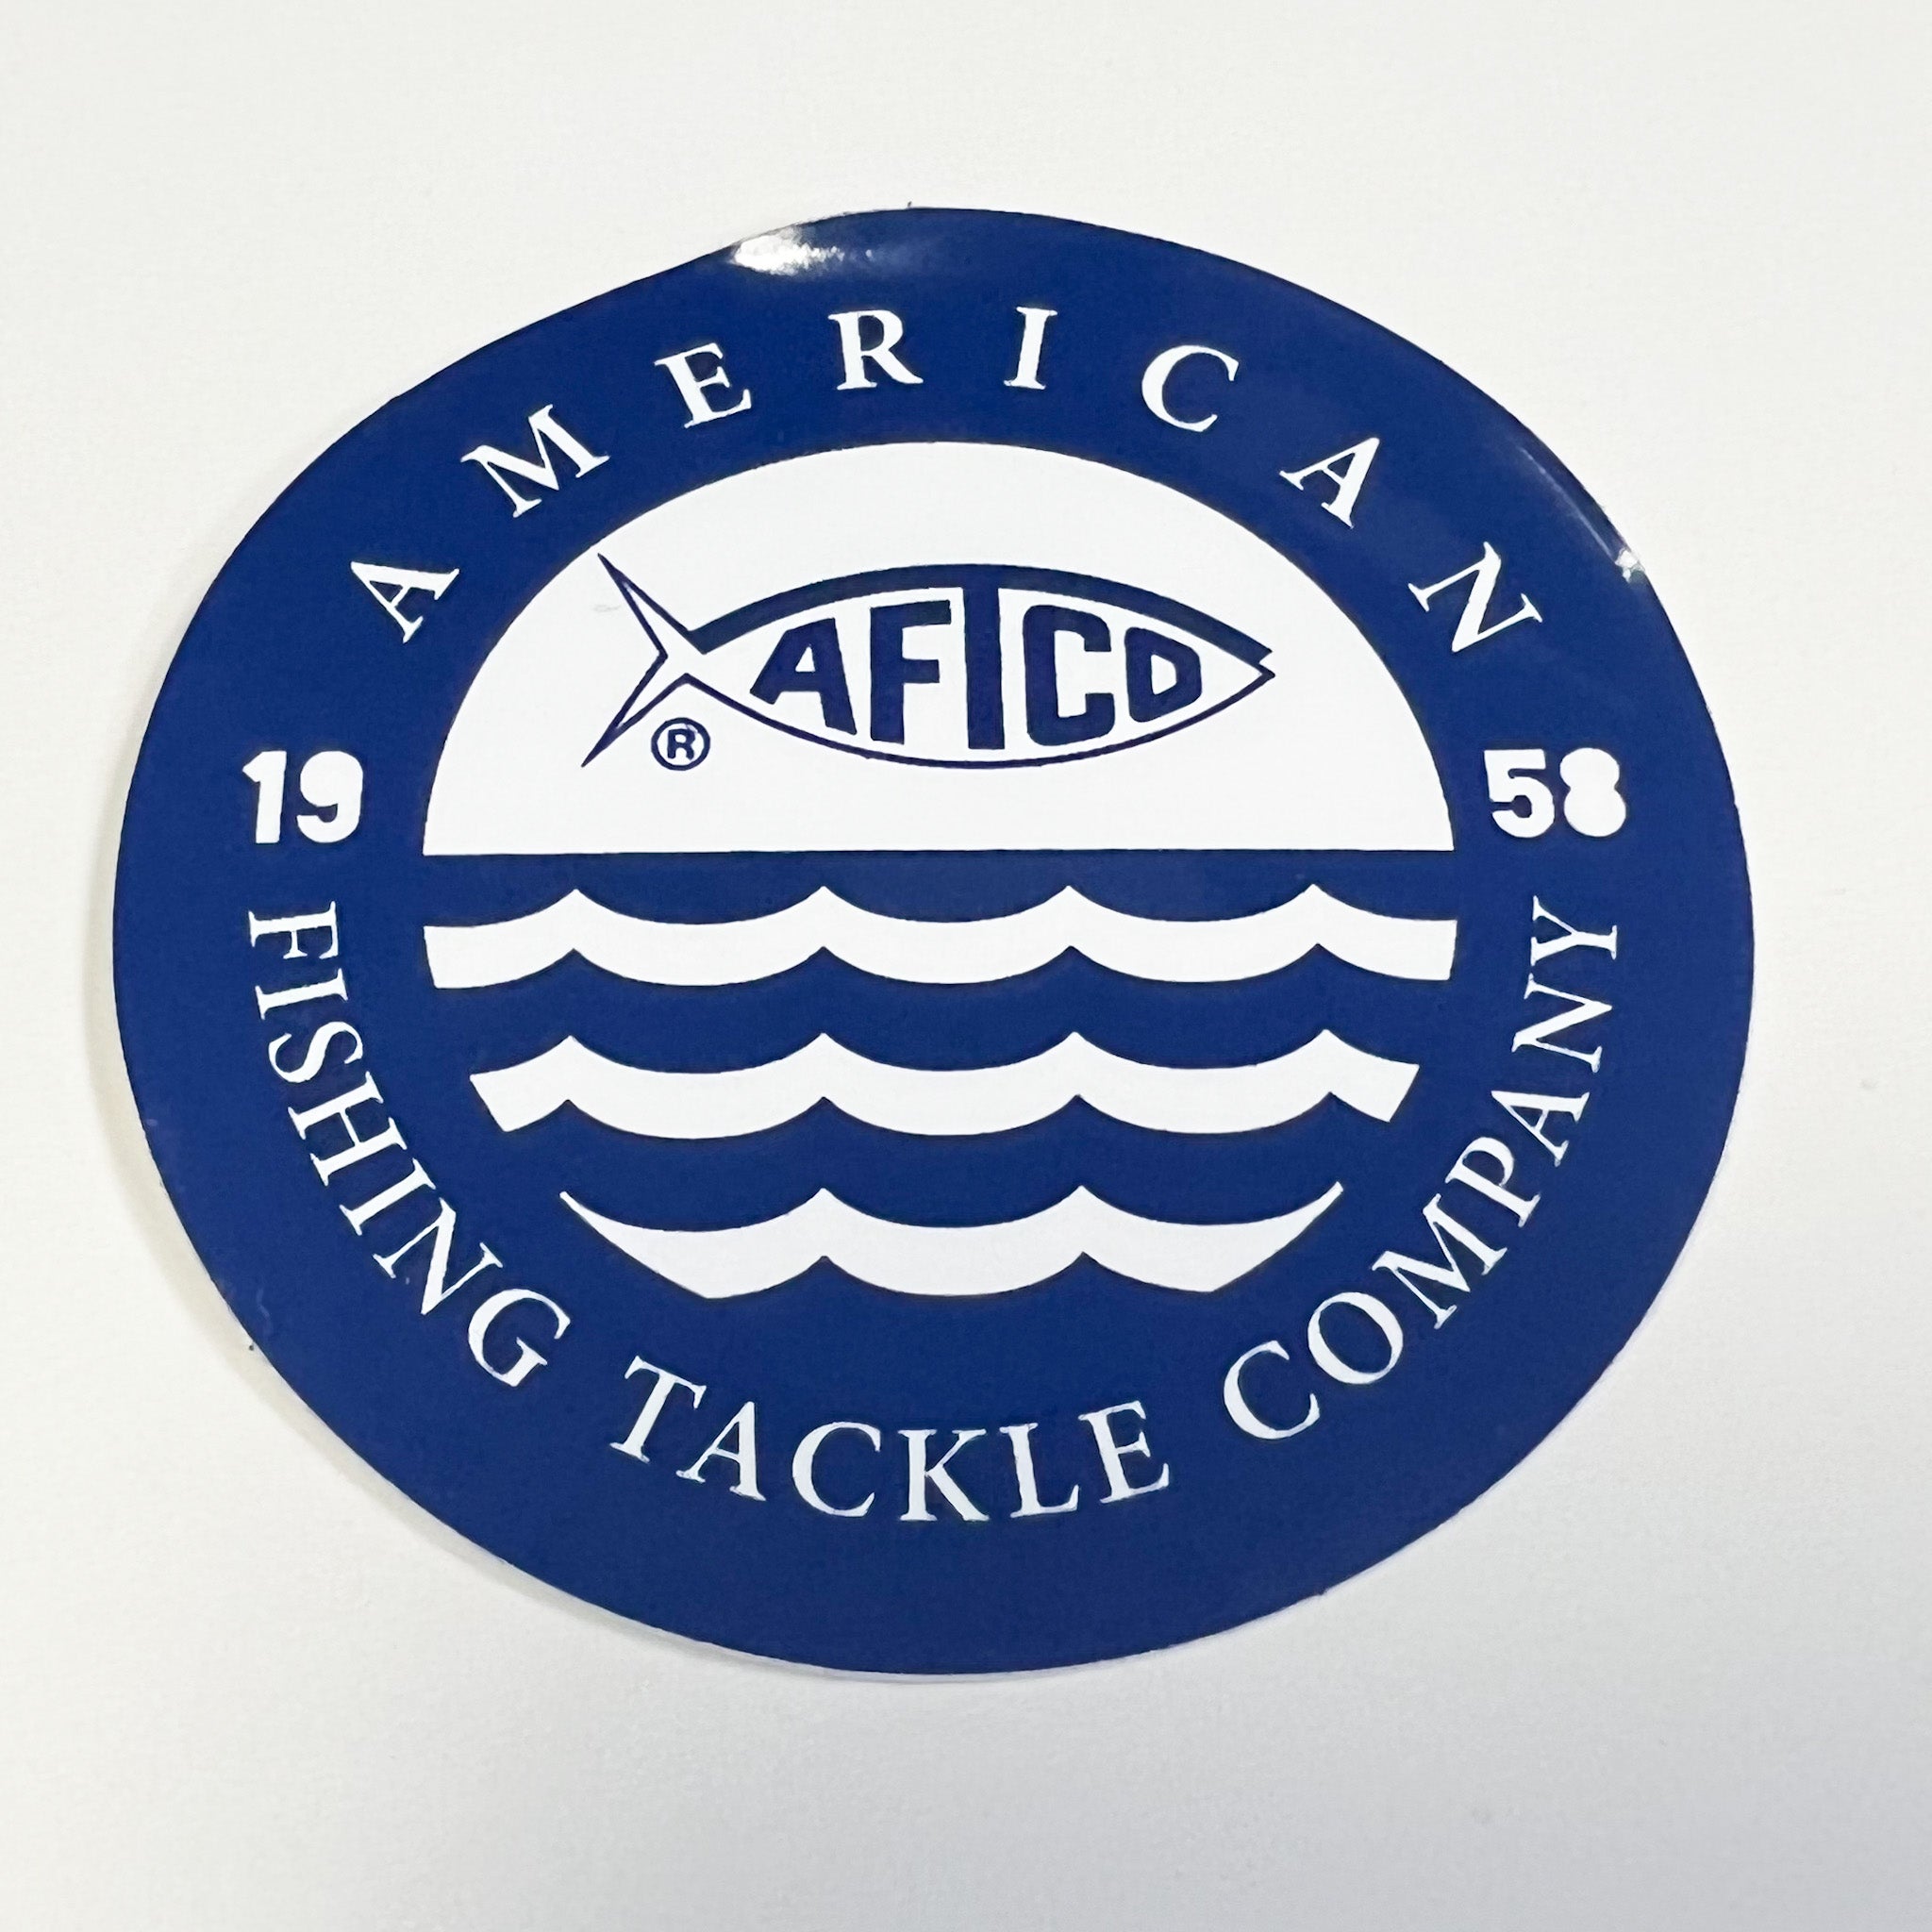 AFTCO  American Fishing Tackle Company 